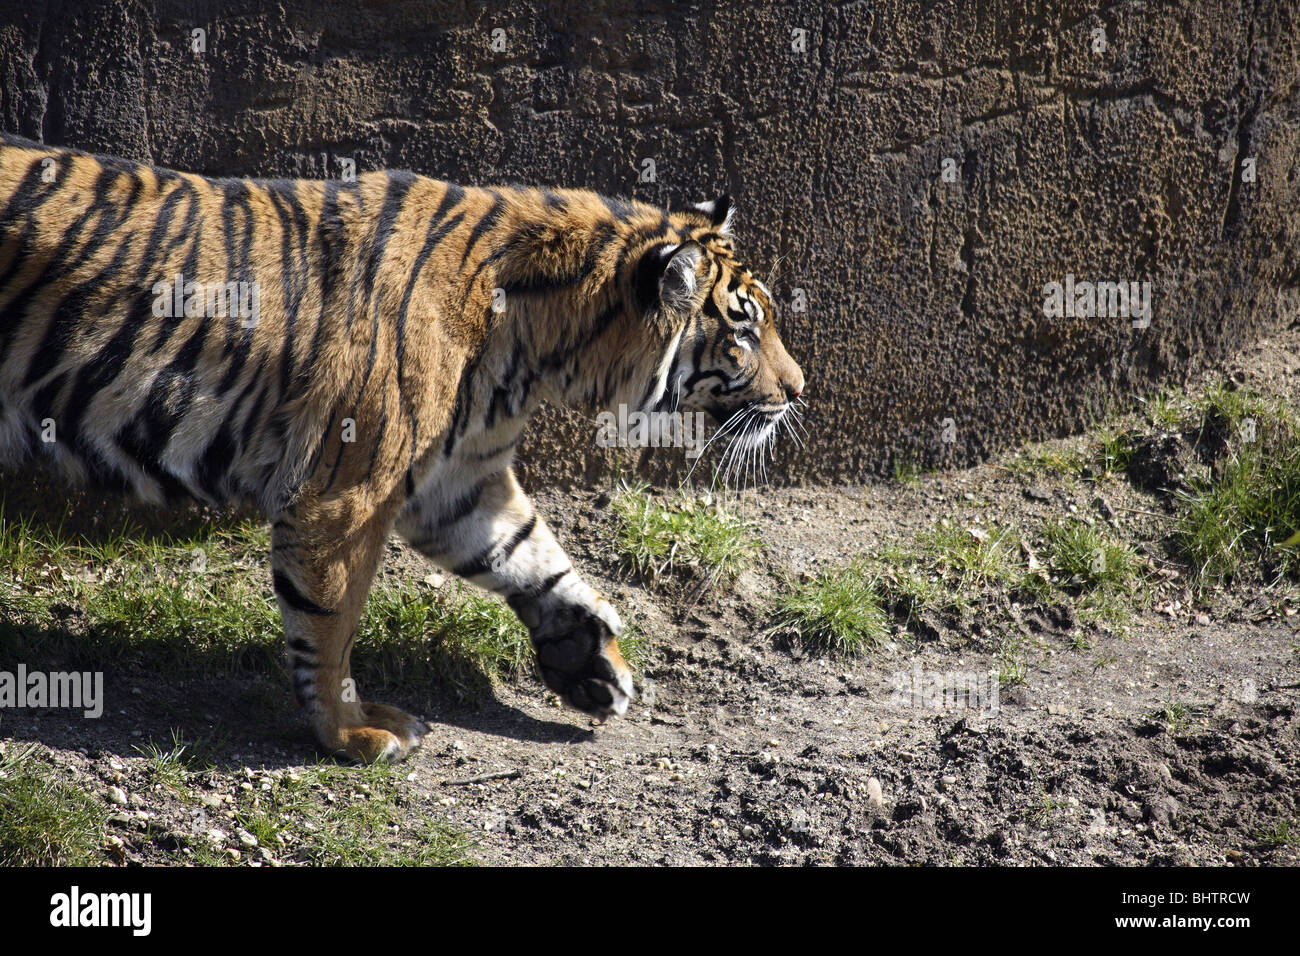 A tiger in a zoo, walking around enclosure Stock Photo